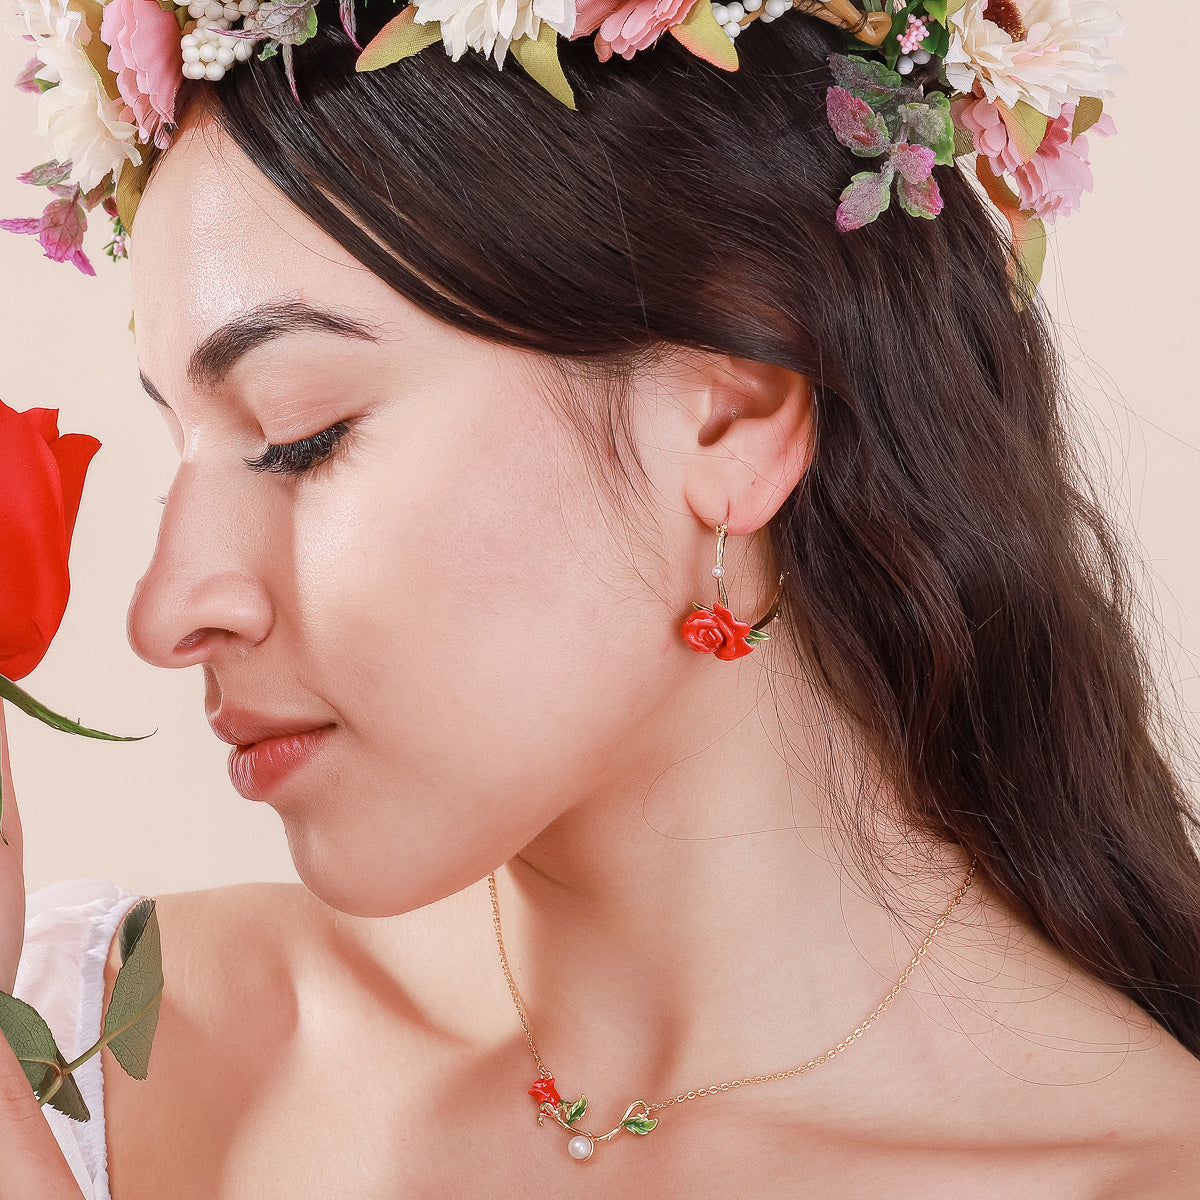 rose garland stud earrings and necklace